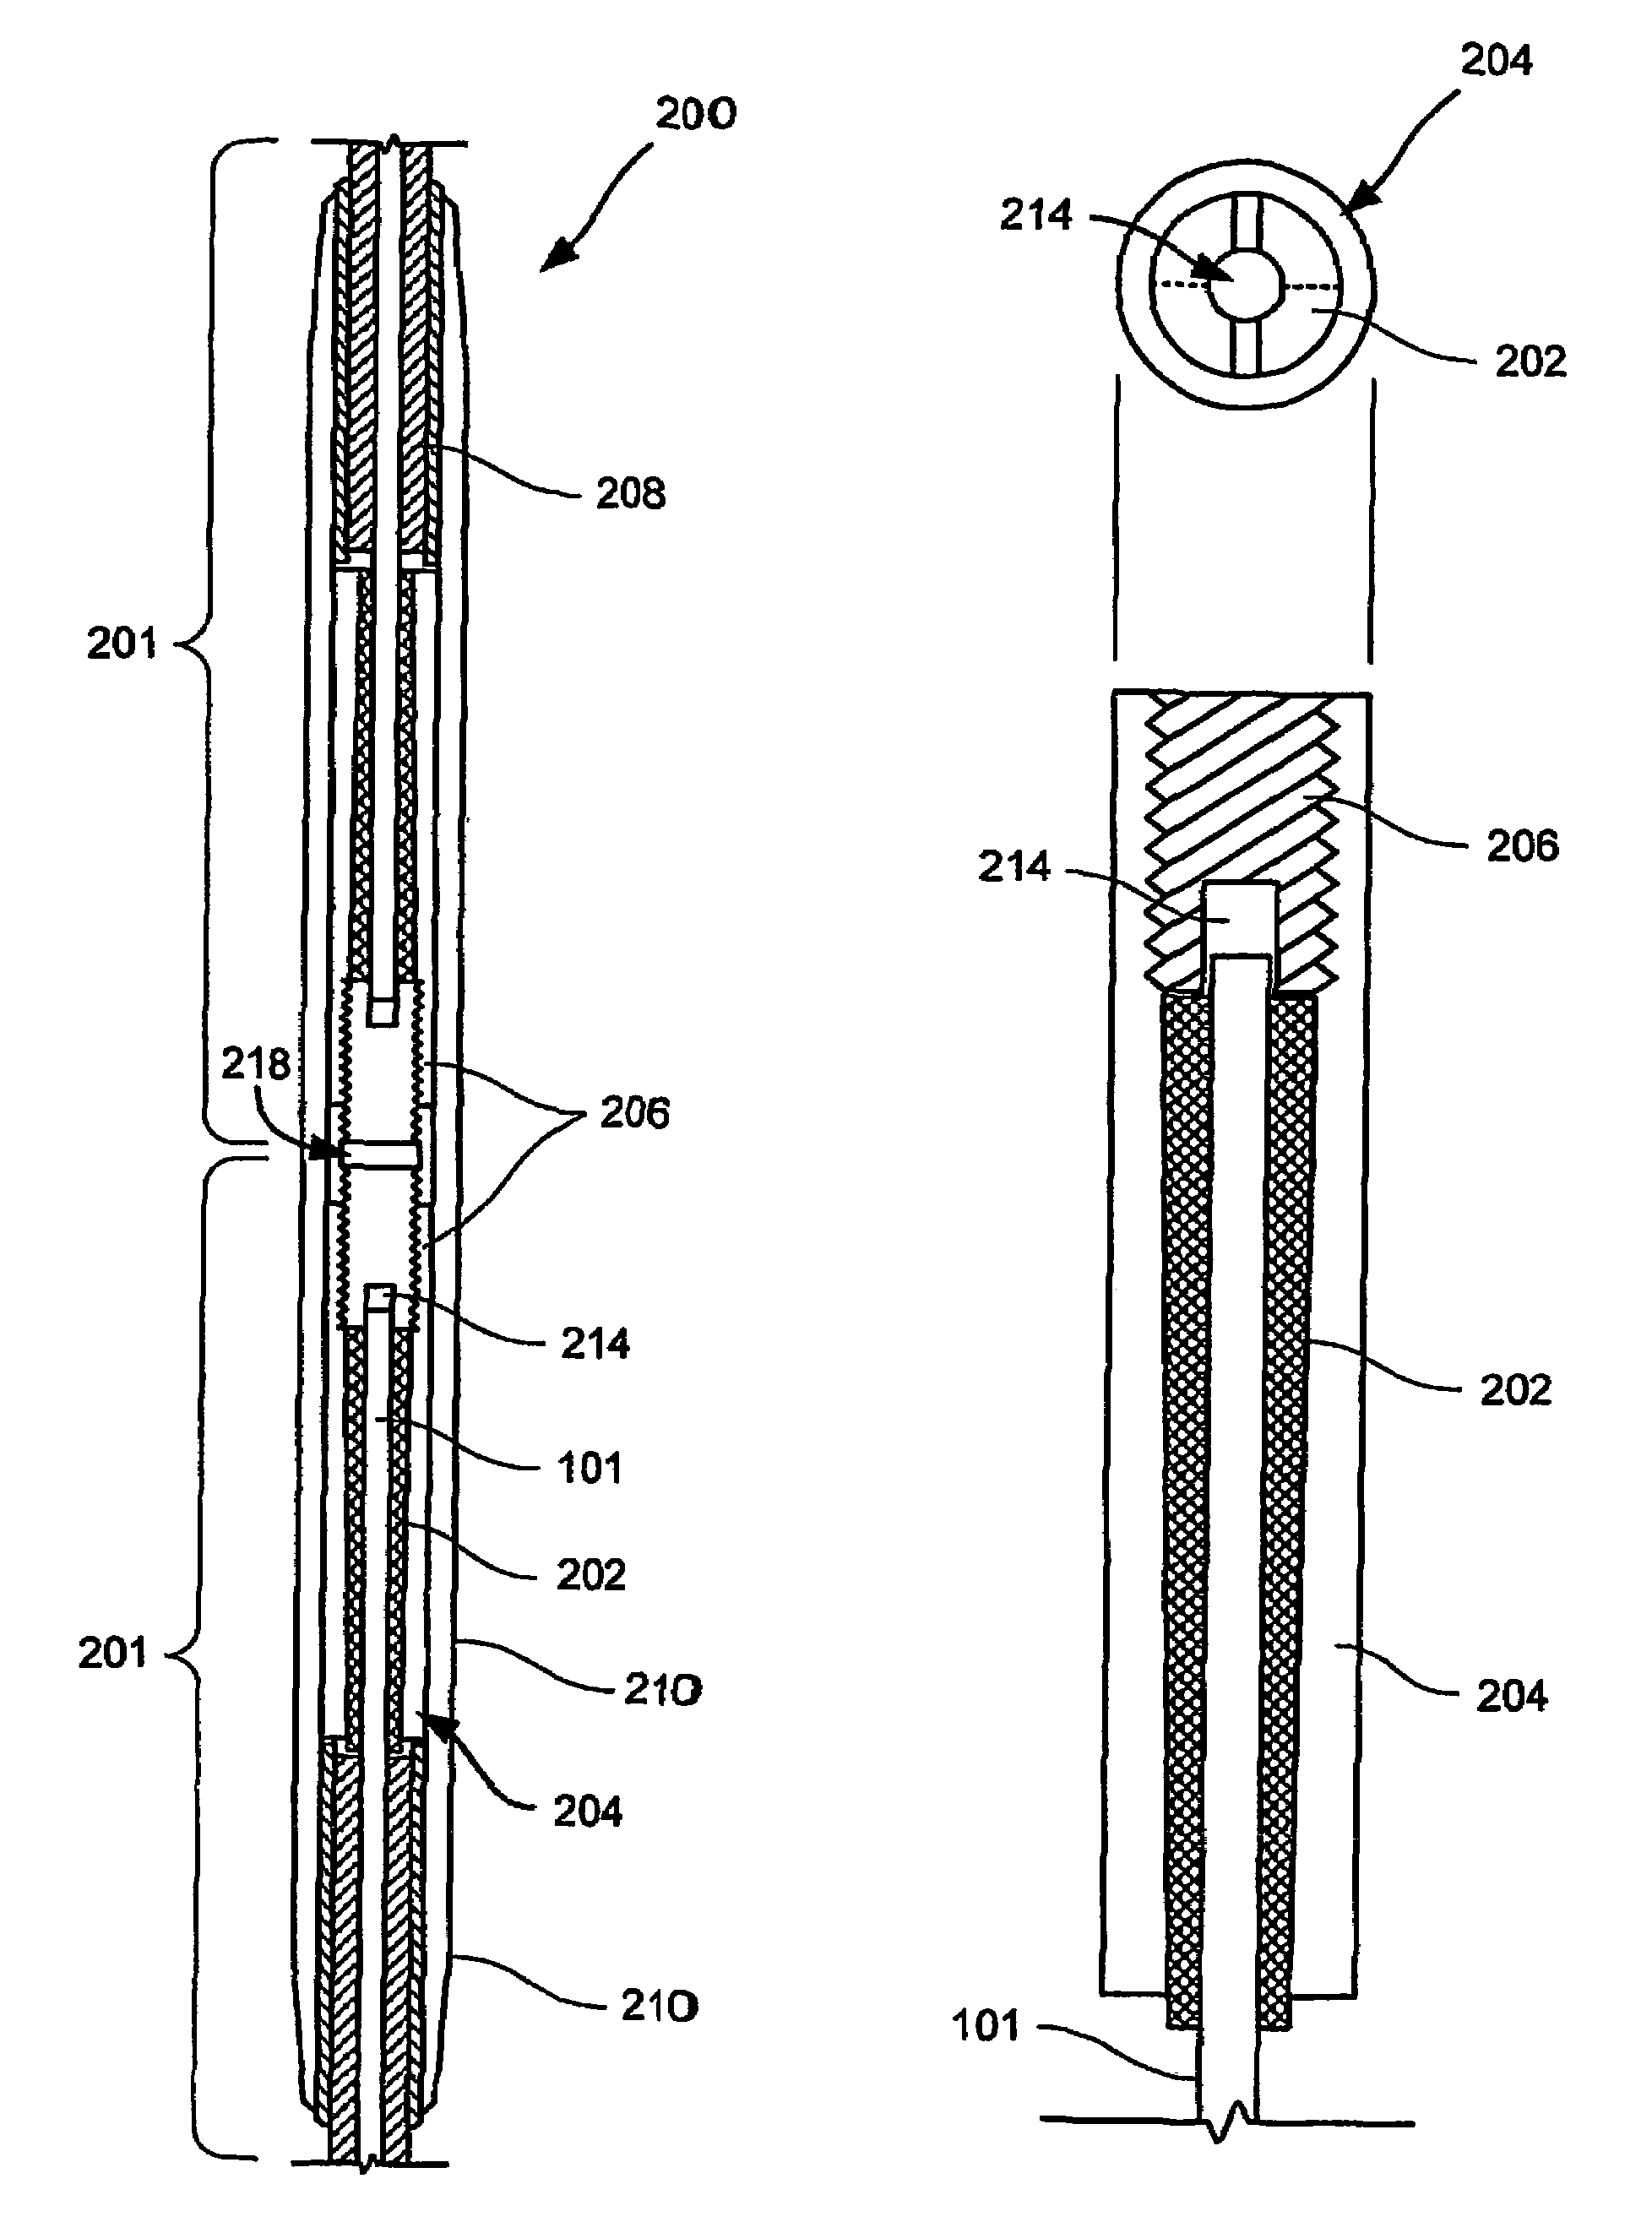 Collet-type splice and dead end for use with an aluminum conductor composite core reinforced cable